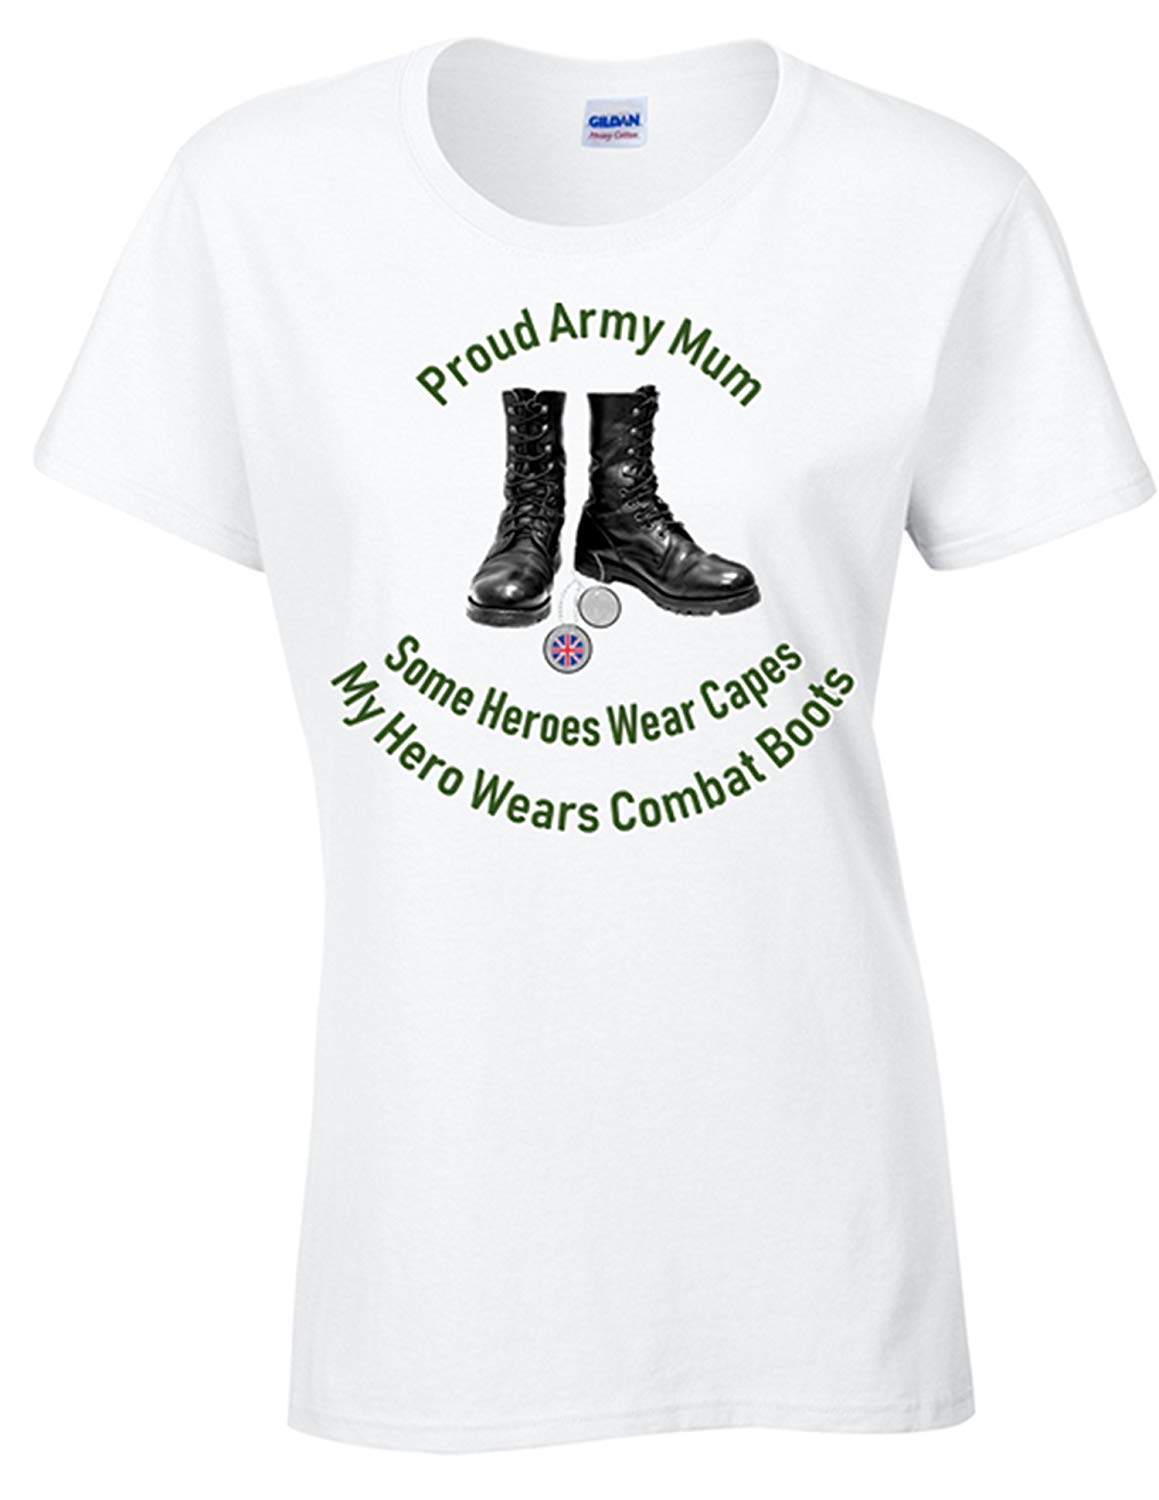 Bear Essentials Proud Army Mum T-Shirt - Army 1157 kit White / XL Army 1157 Kit Veterans Owned Business